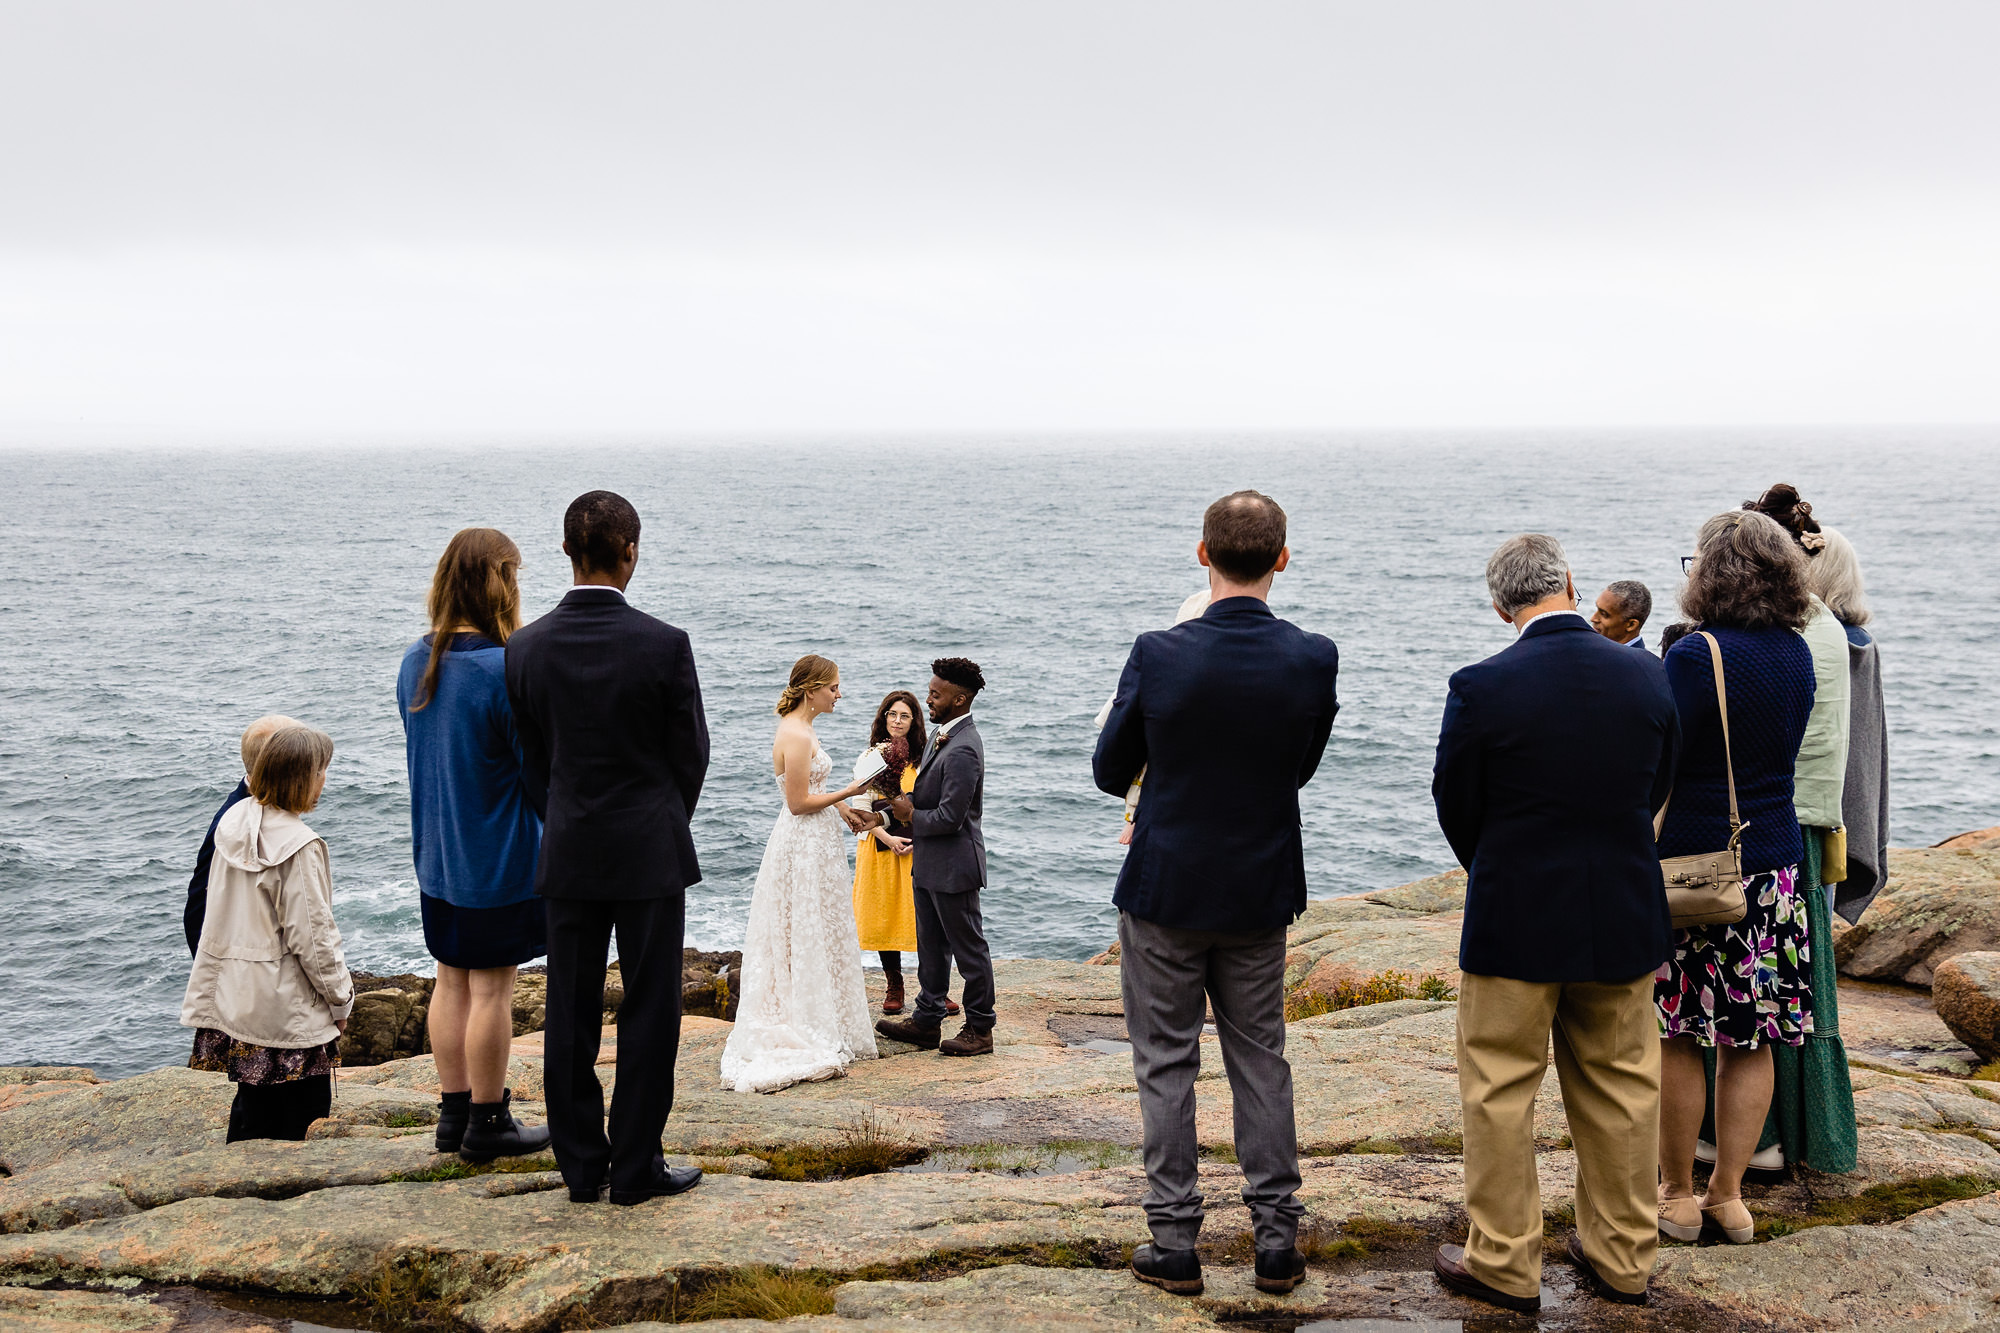 A wedding ceremony in Acadia National Park on a foggy day